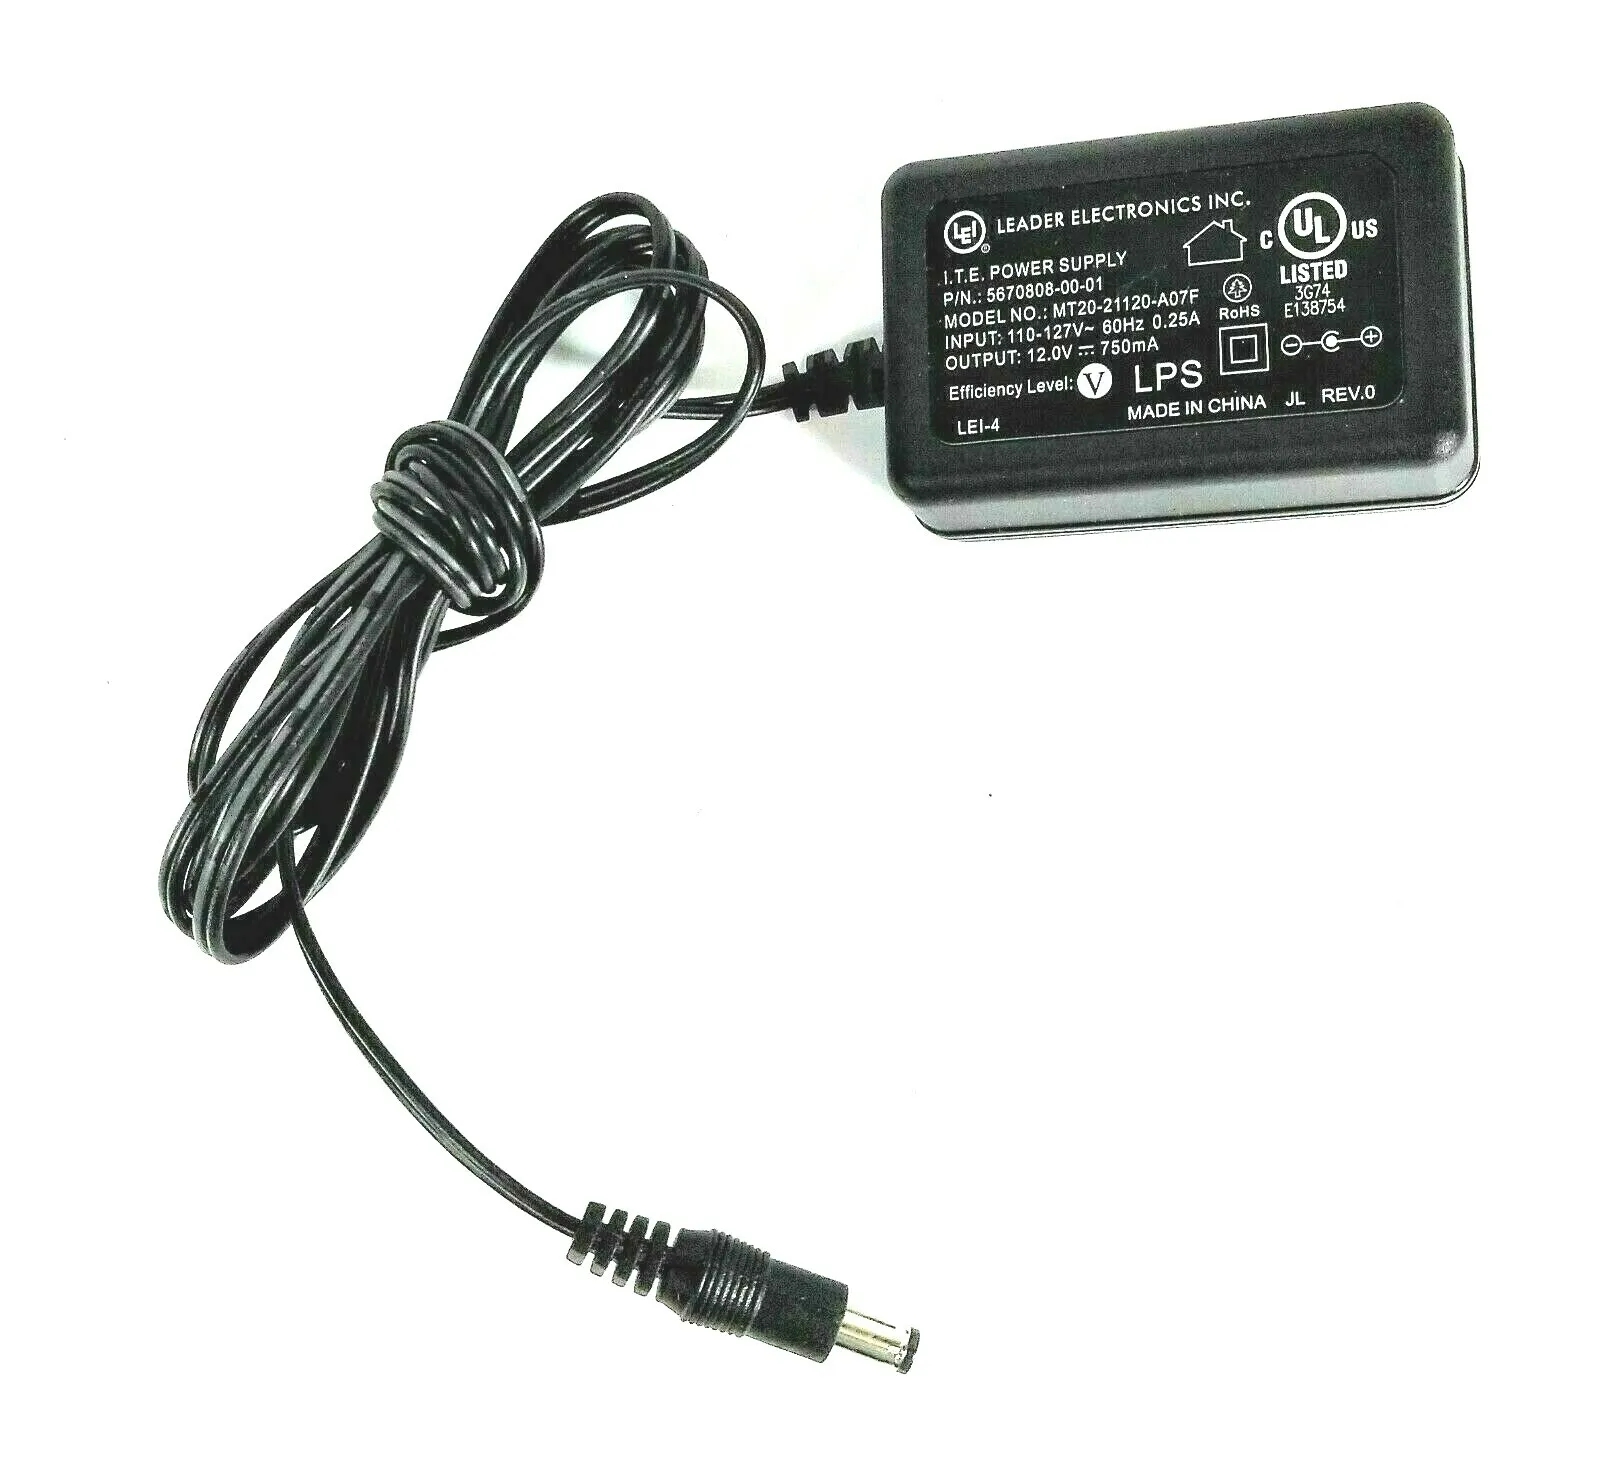 *Brand NEW*LEI 5670808-00-01 MT20-21120-A07F 12.0V 750mA AC ADAPTER Power Supply